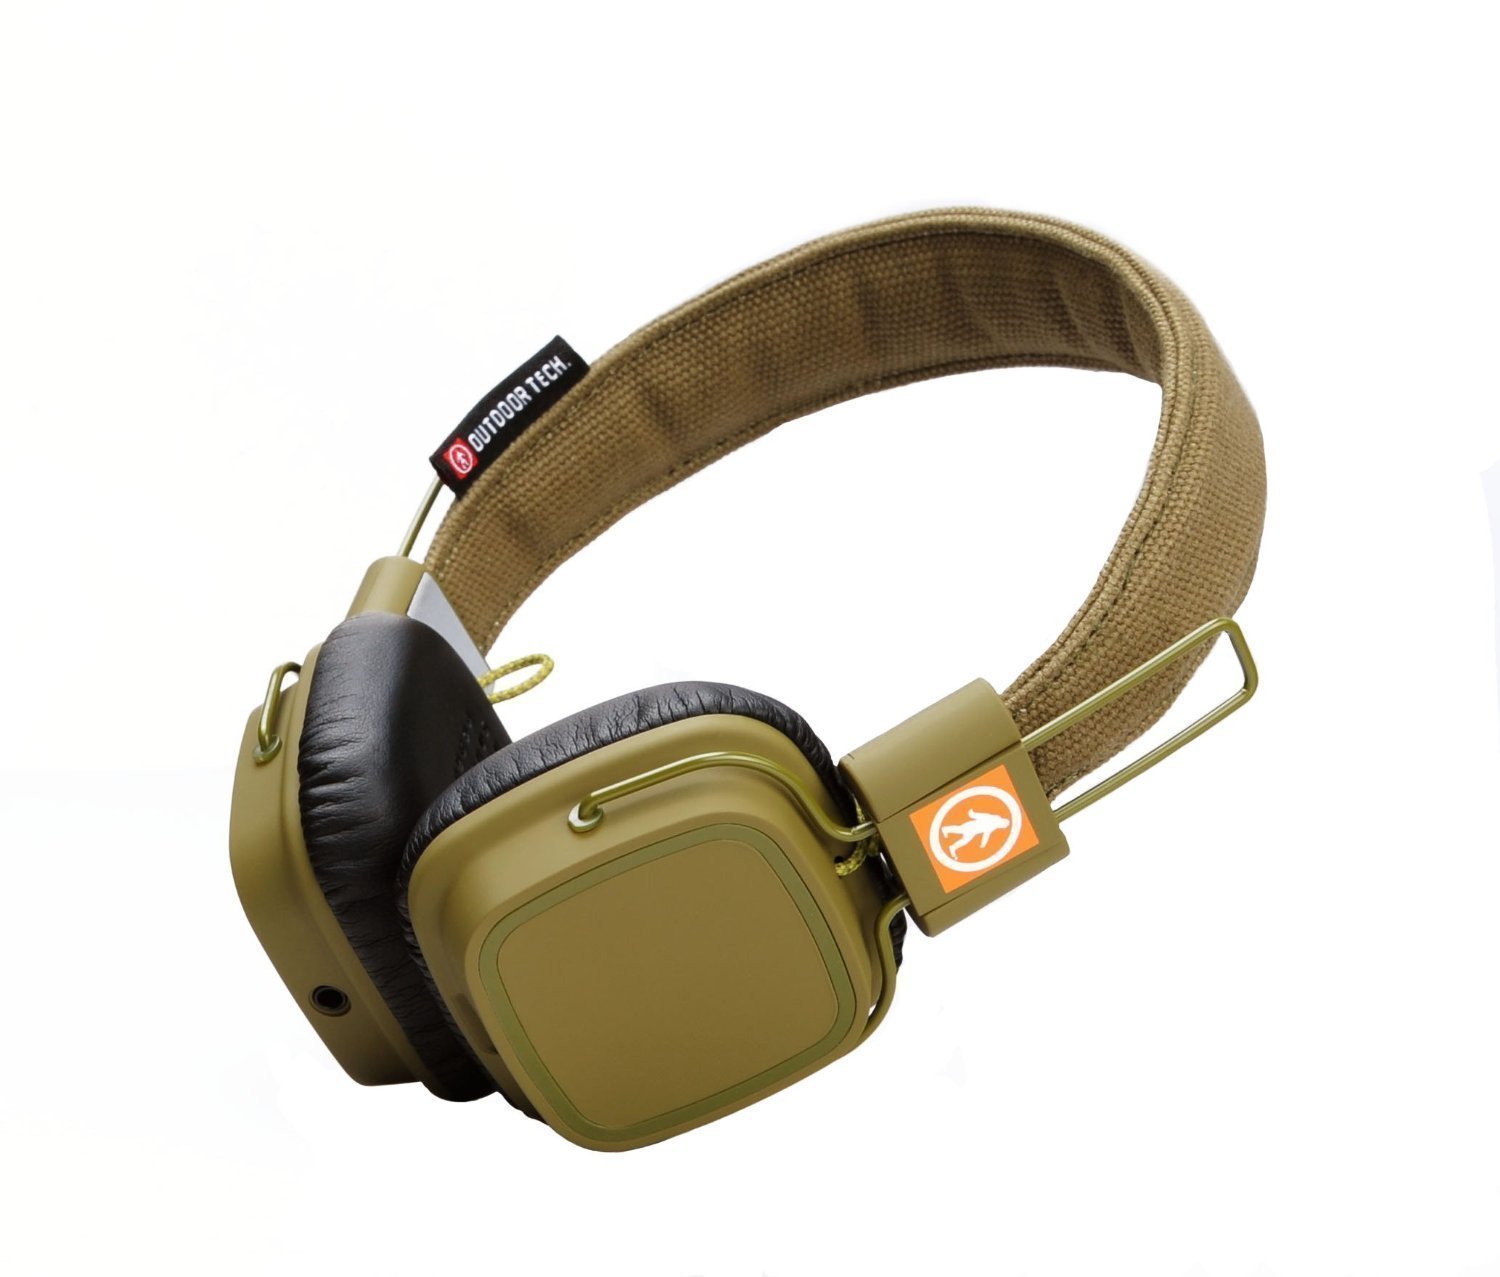 Auriculares inalámbricos On-ear Outdoor Tech Privates - Wireless Touch Control Headphones - Army Green